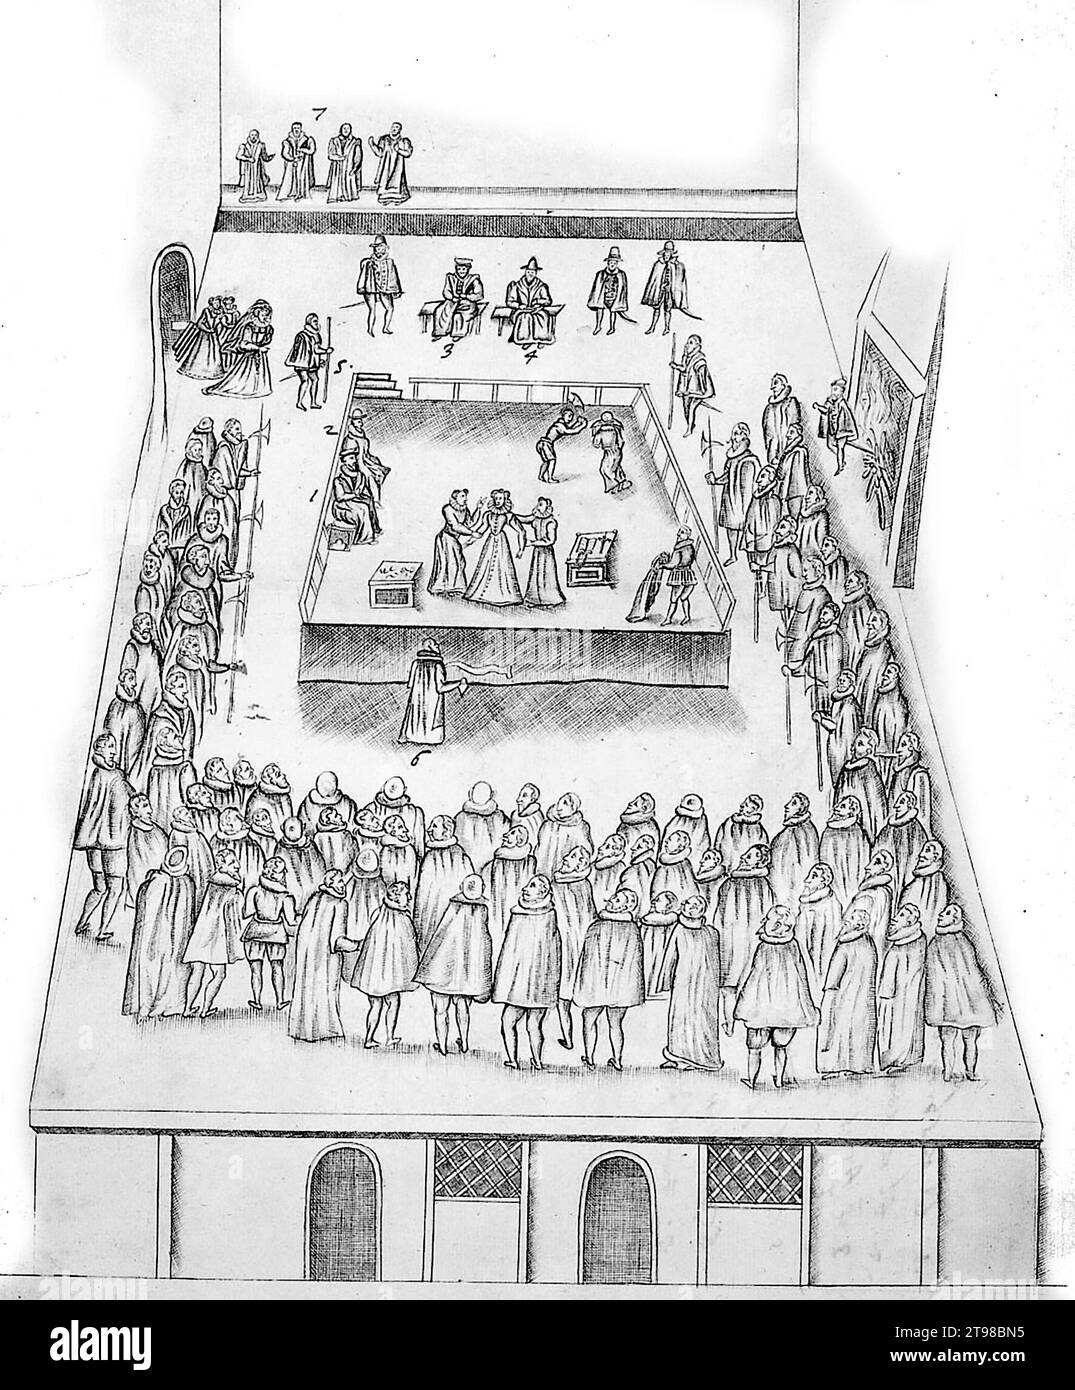 The Execution of Mary Queen of Scots on 8th Februay 1587, drawing by eyewitness Robert Beale, Clerk of the Privy Council to Queen Elizabeth I,  1587 Stock Photo